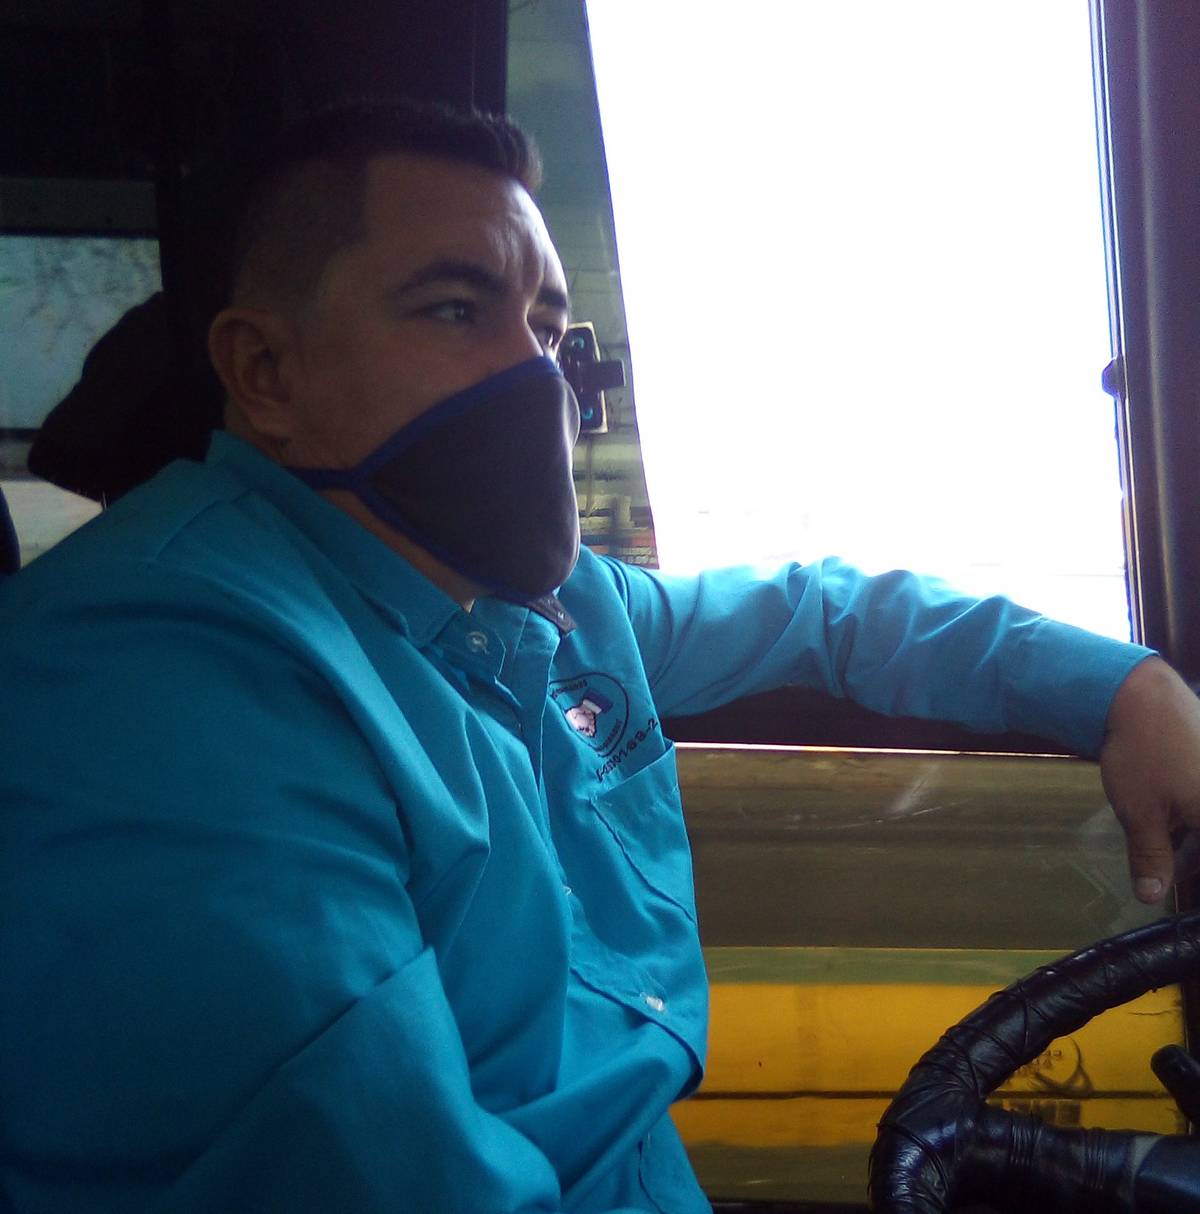 The bus driver wearing a mask.